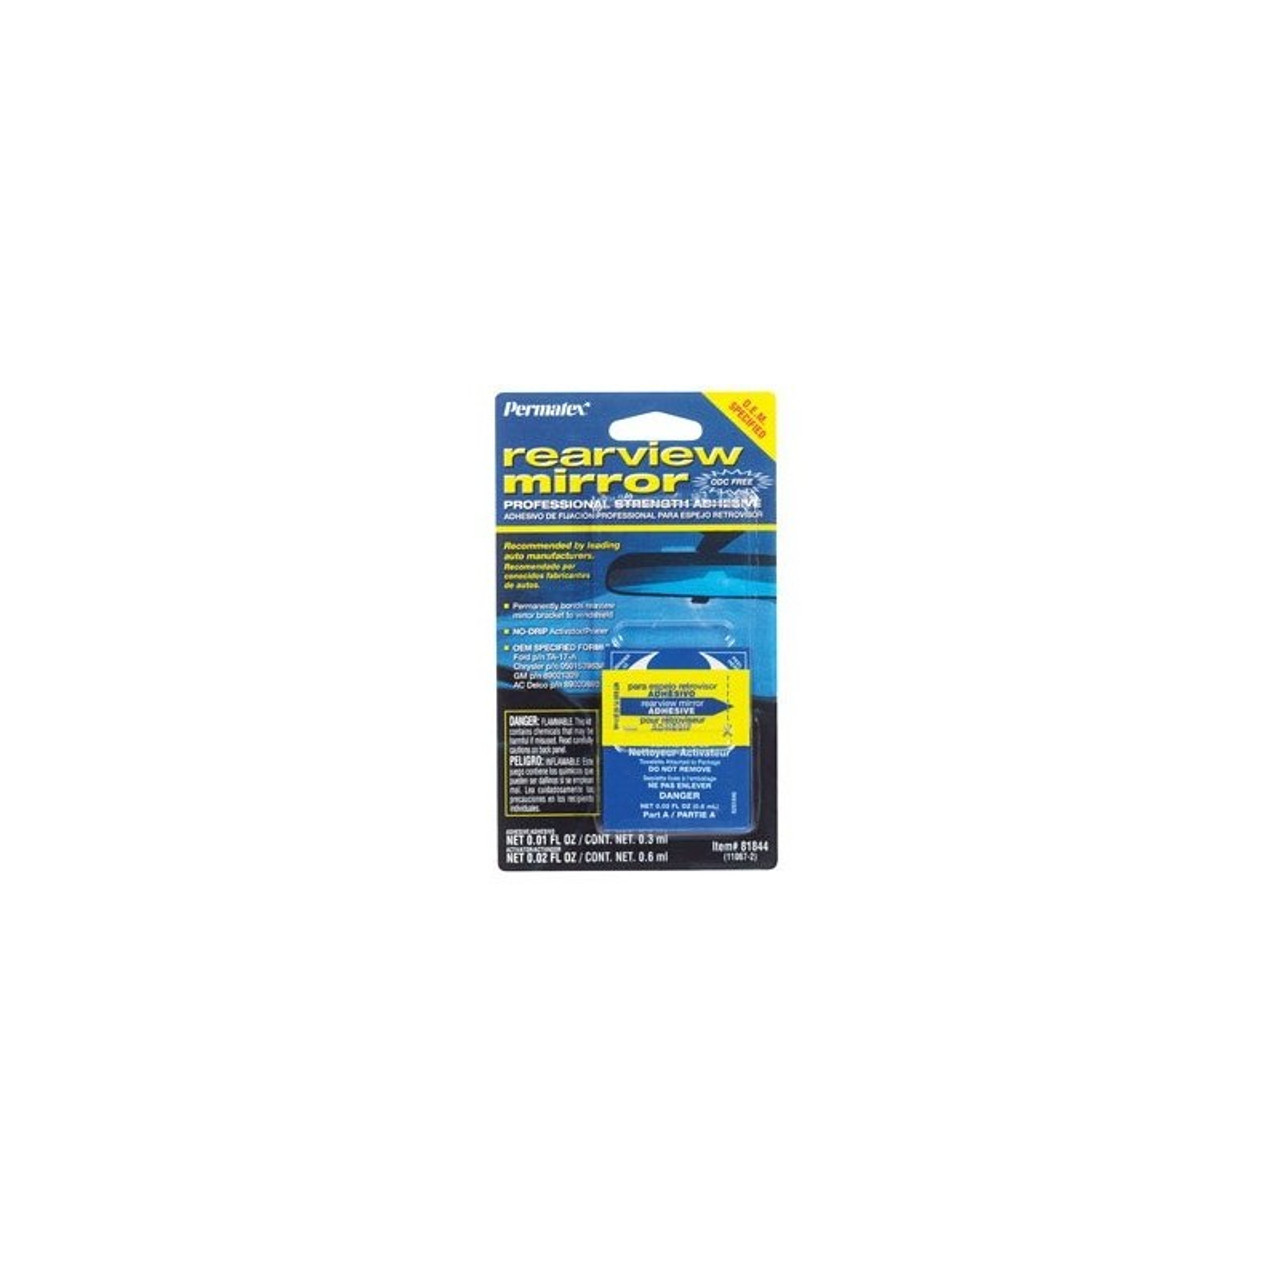 Permatex 81844 Professional Strength Rear view Mirror Adhesive For All Cars